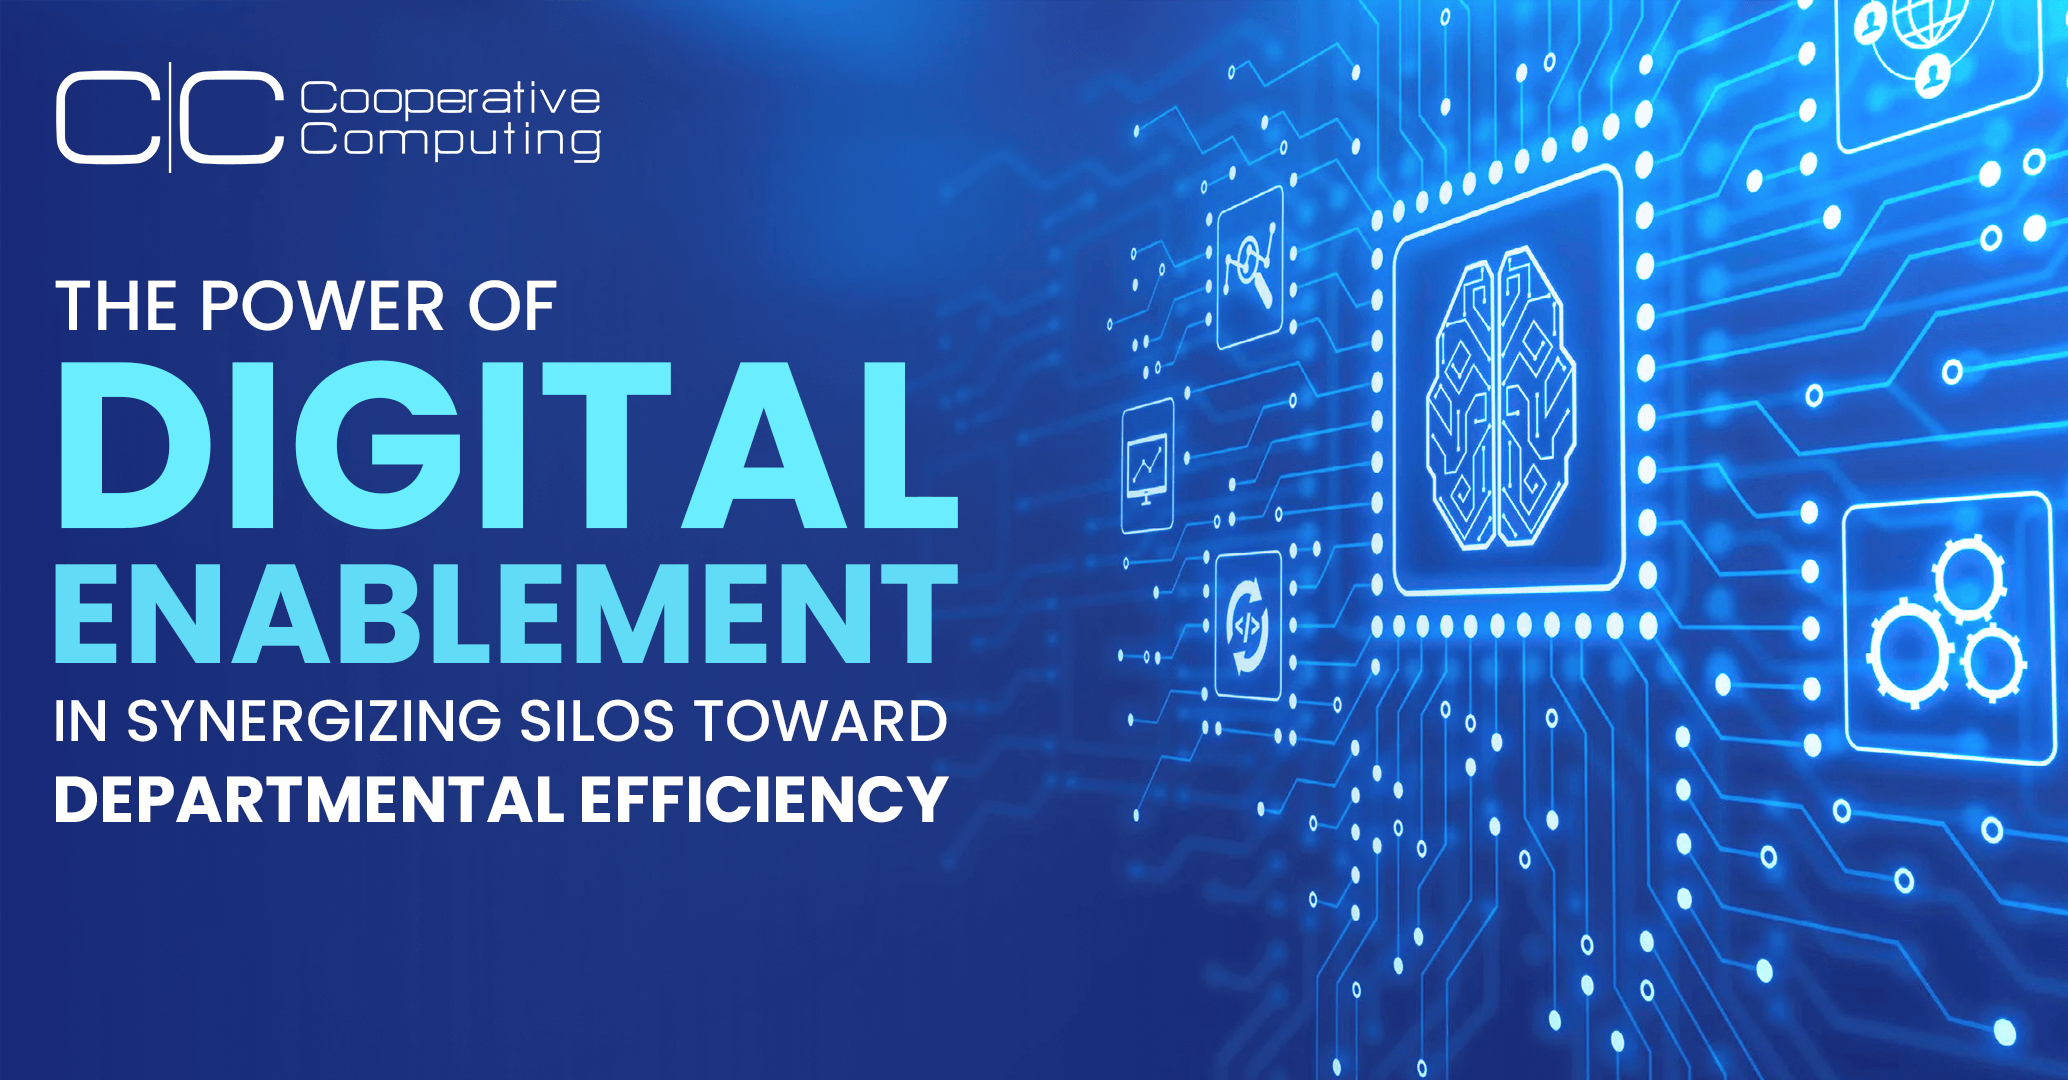 The Power of Digital Enablement in Synergizing Silos Toward Departmental Efficiency | Cooperative Computing | Blog